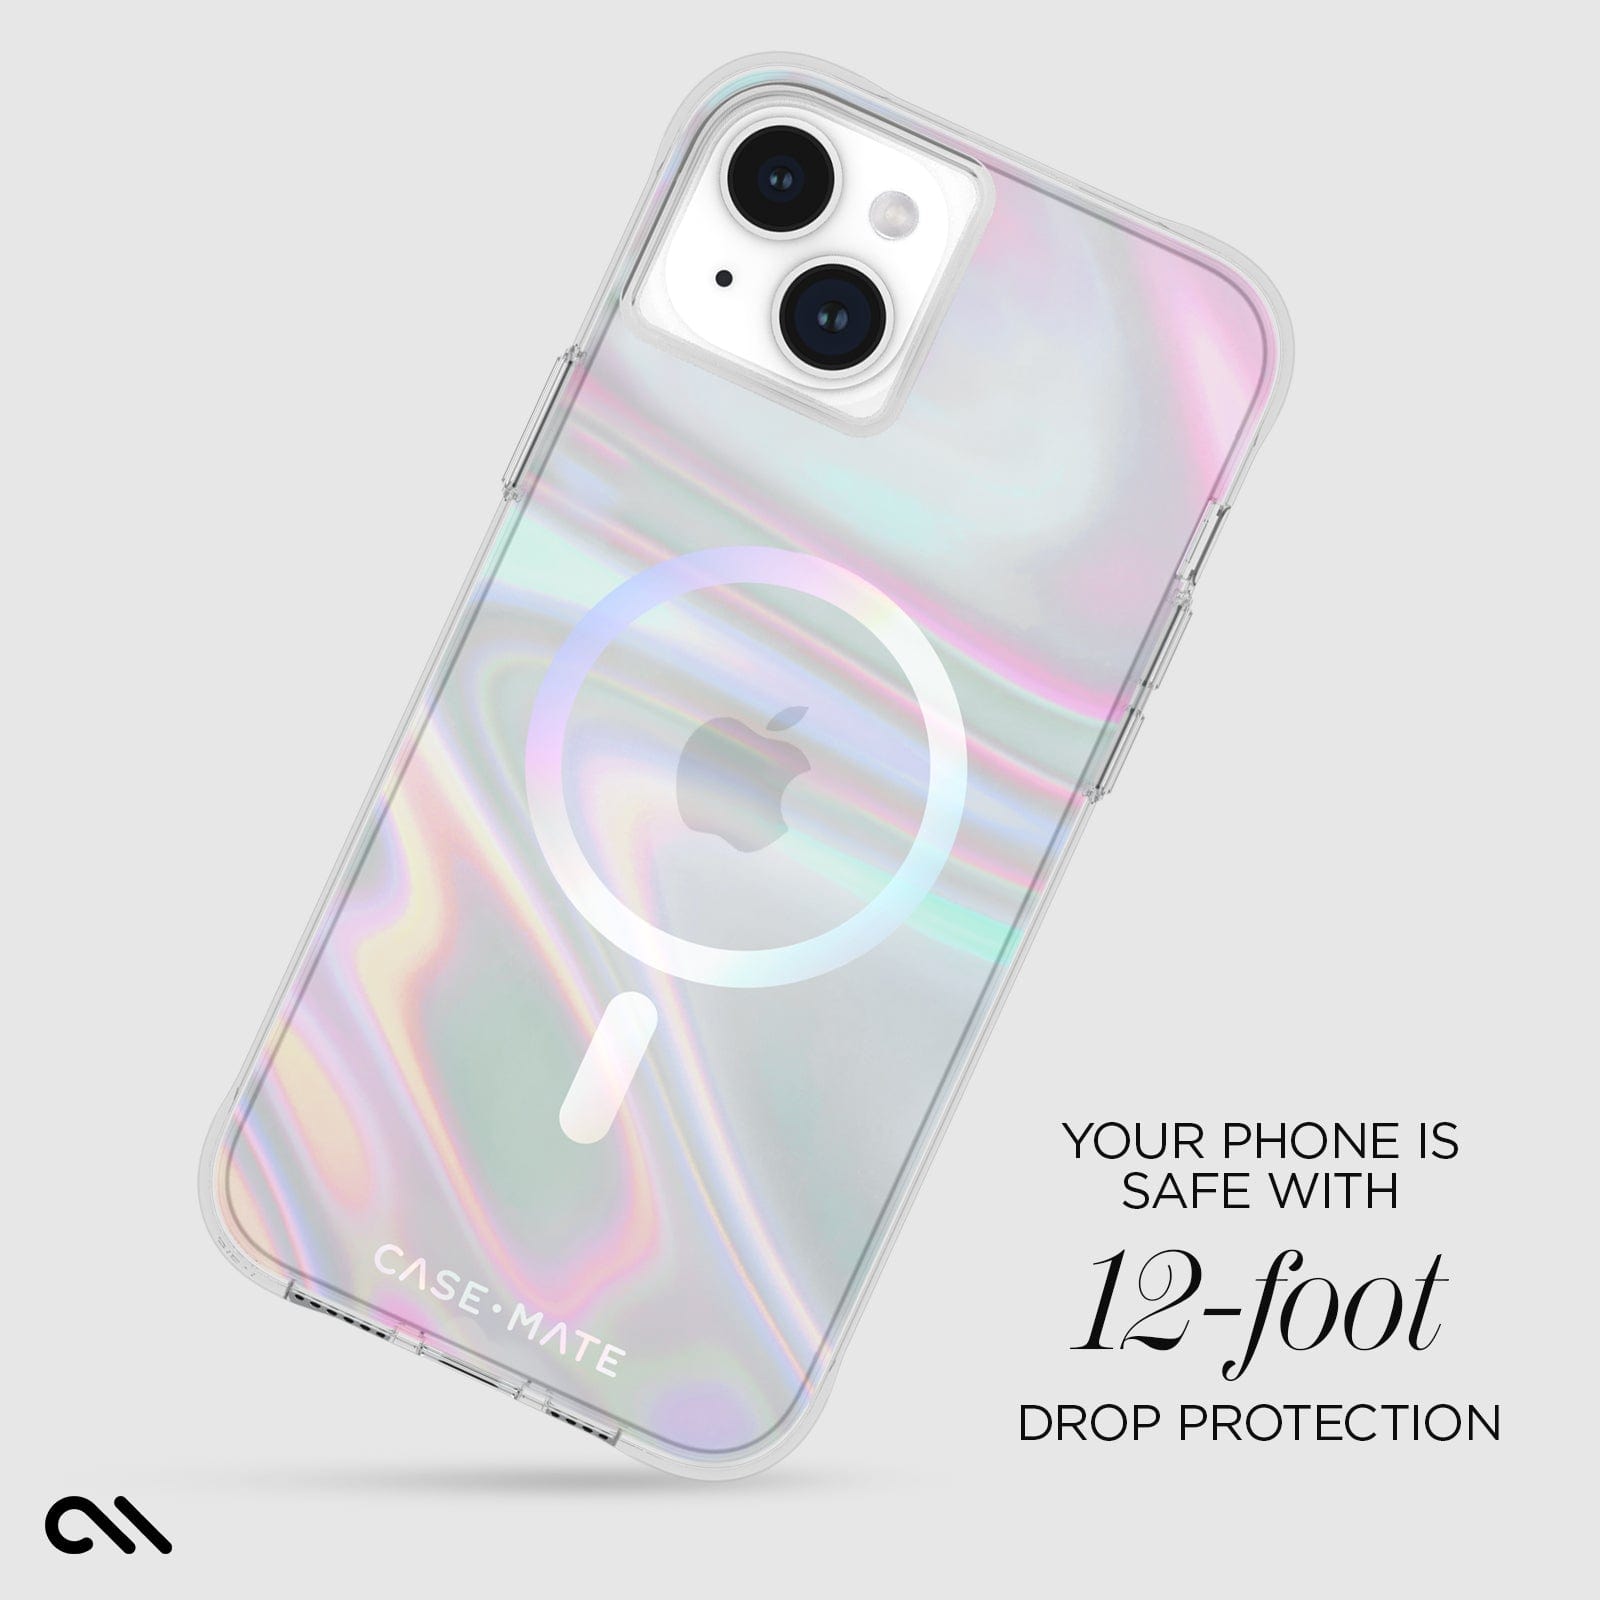 Your phone is safe with 12 foot drop protection